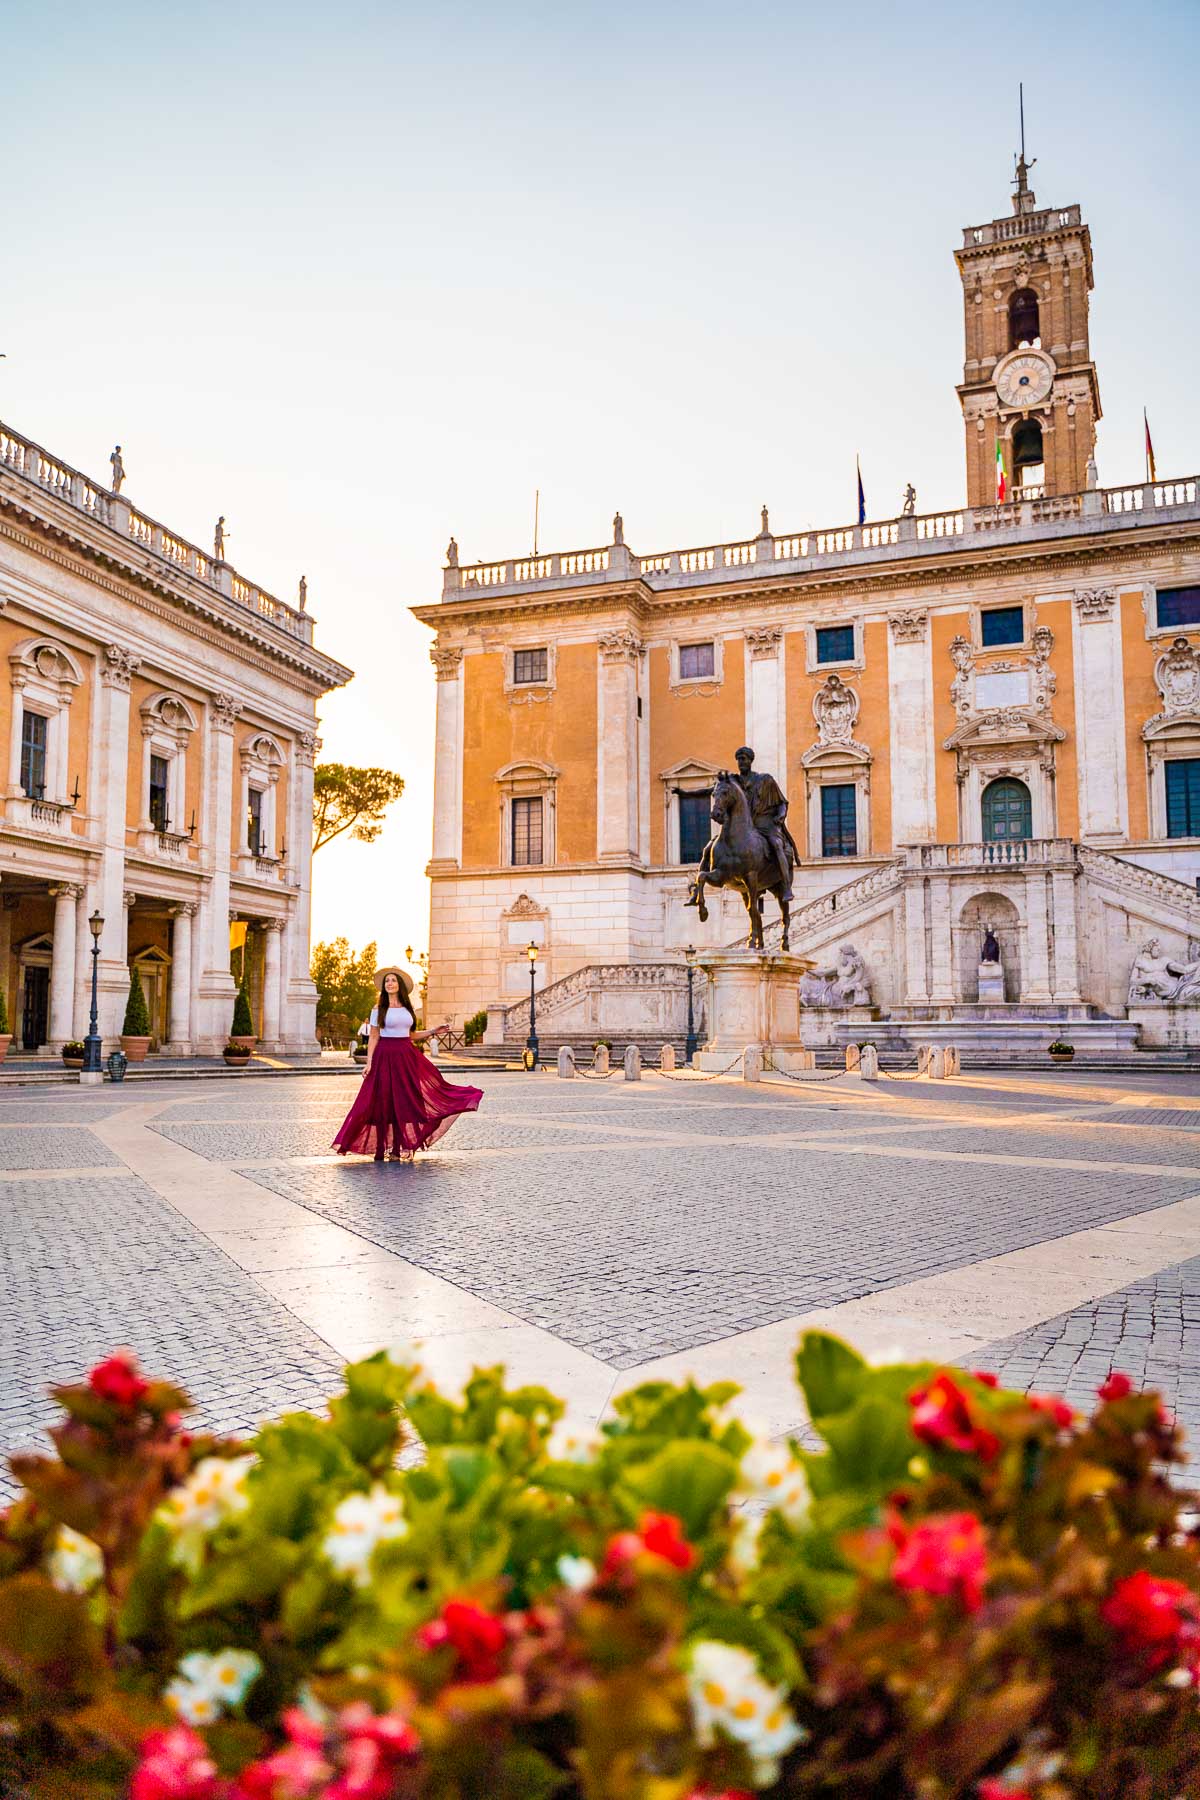 Girl in a red skirt in Piazza Campidoglio in Rome, Italy